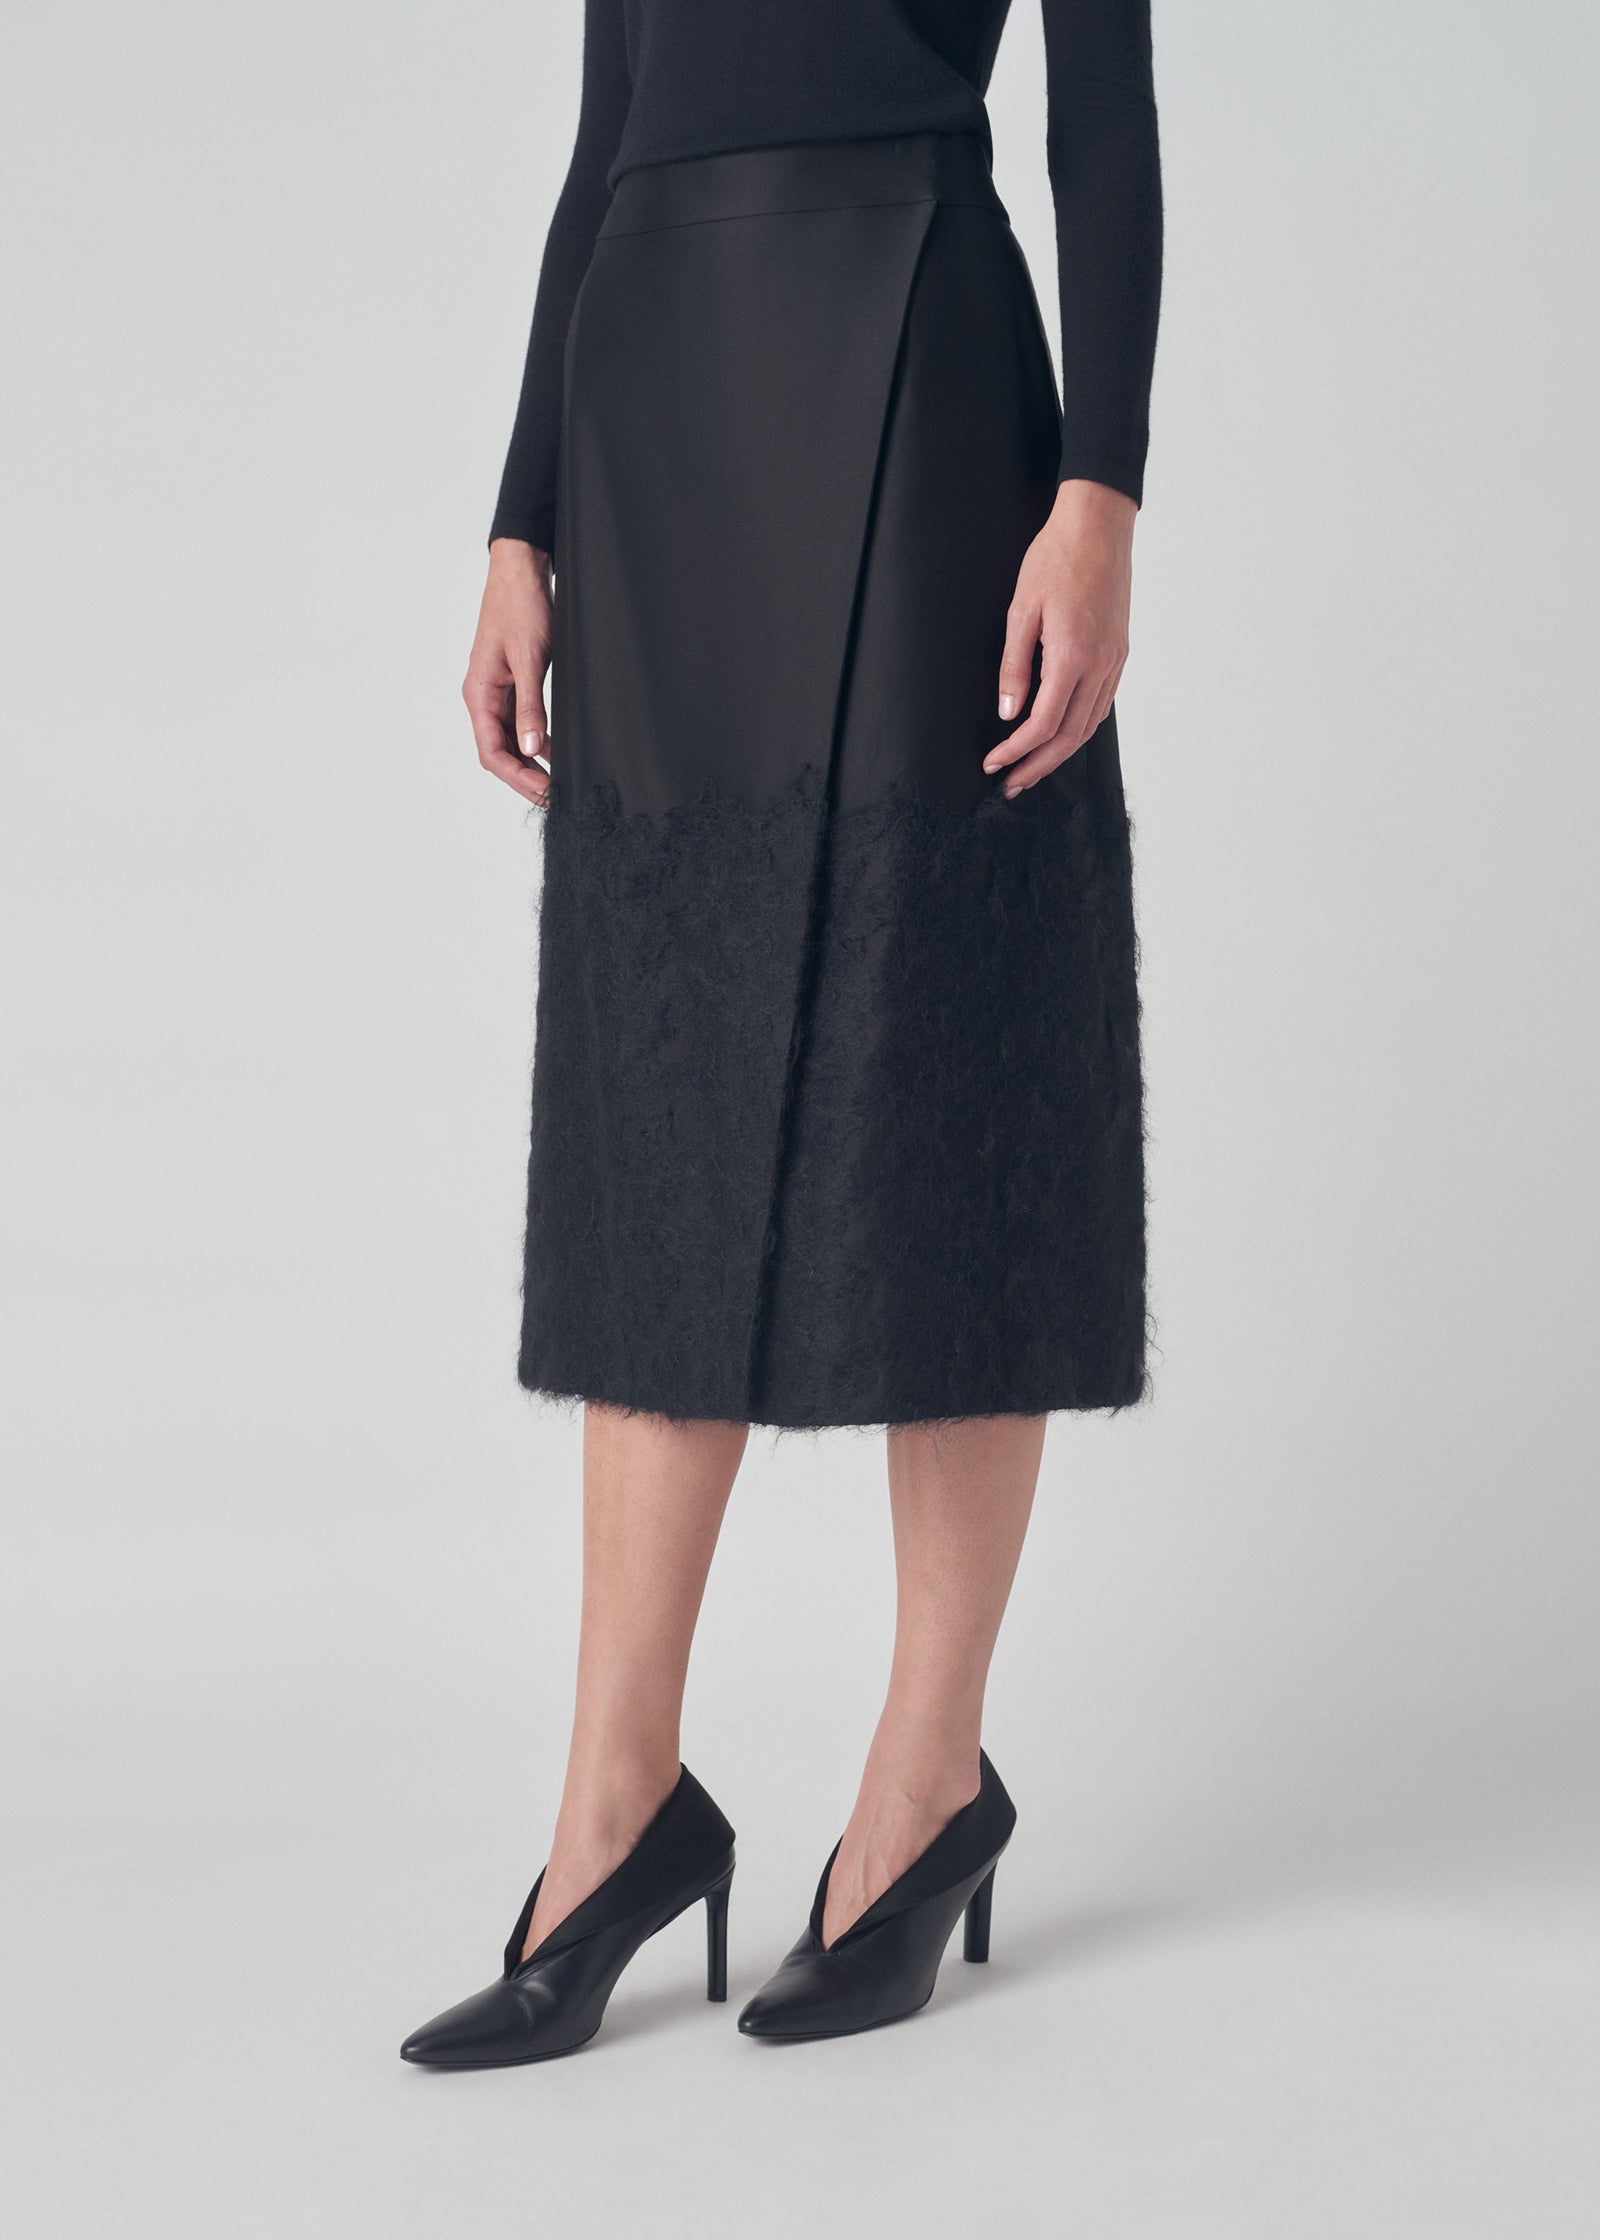 Embroidered Wrap Skirt in Duchess Satin - Black - CO Collections